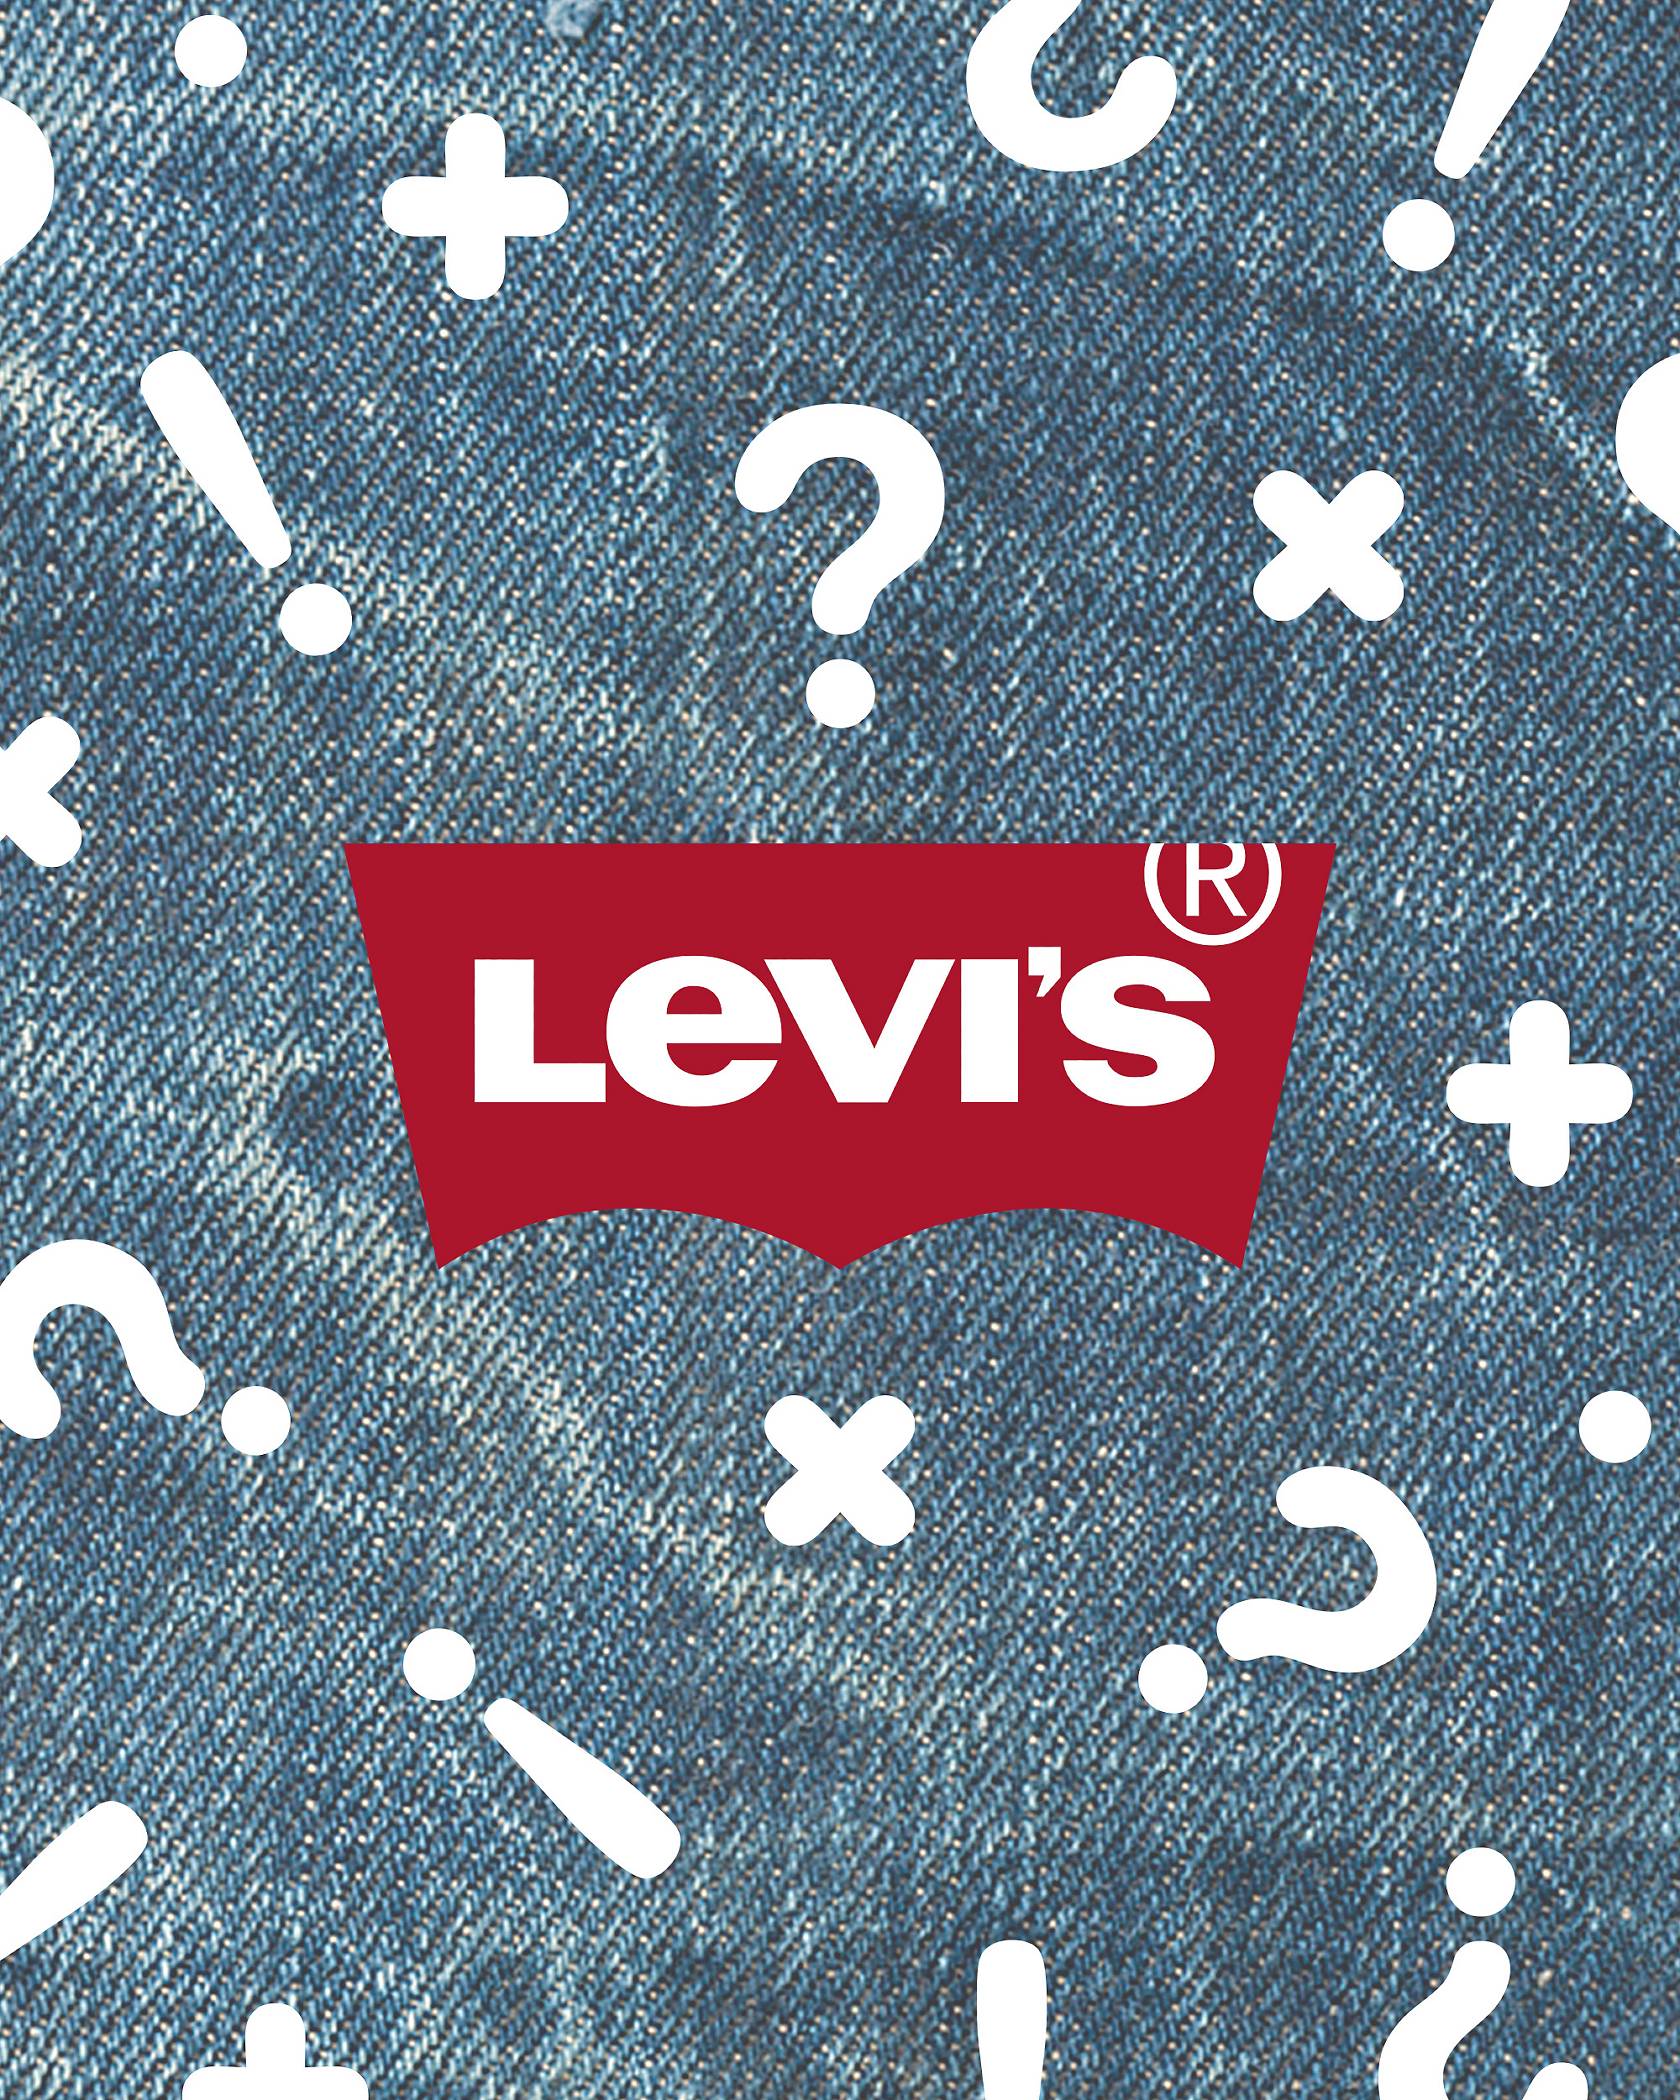 Levi's® Collections - Collaborations, Styles & Designs